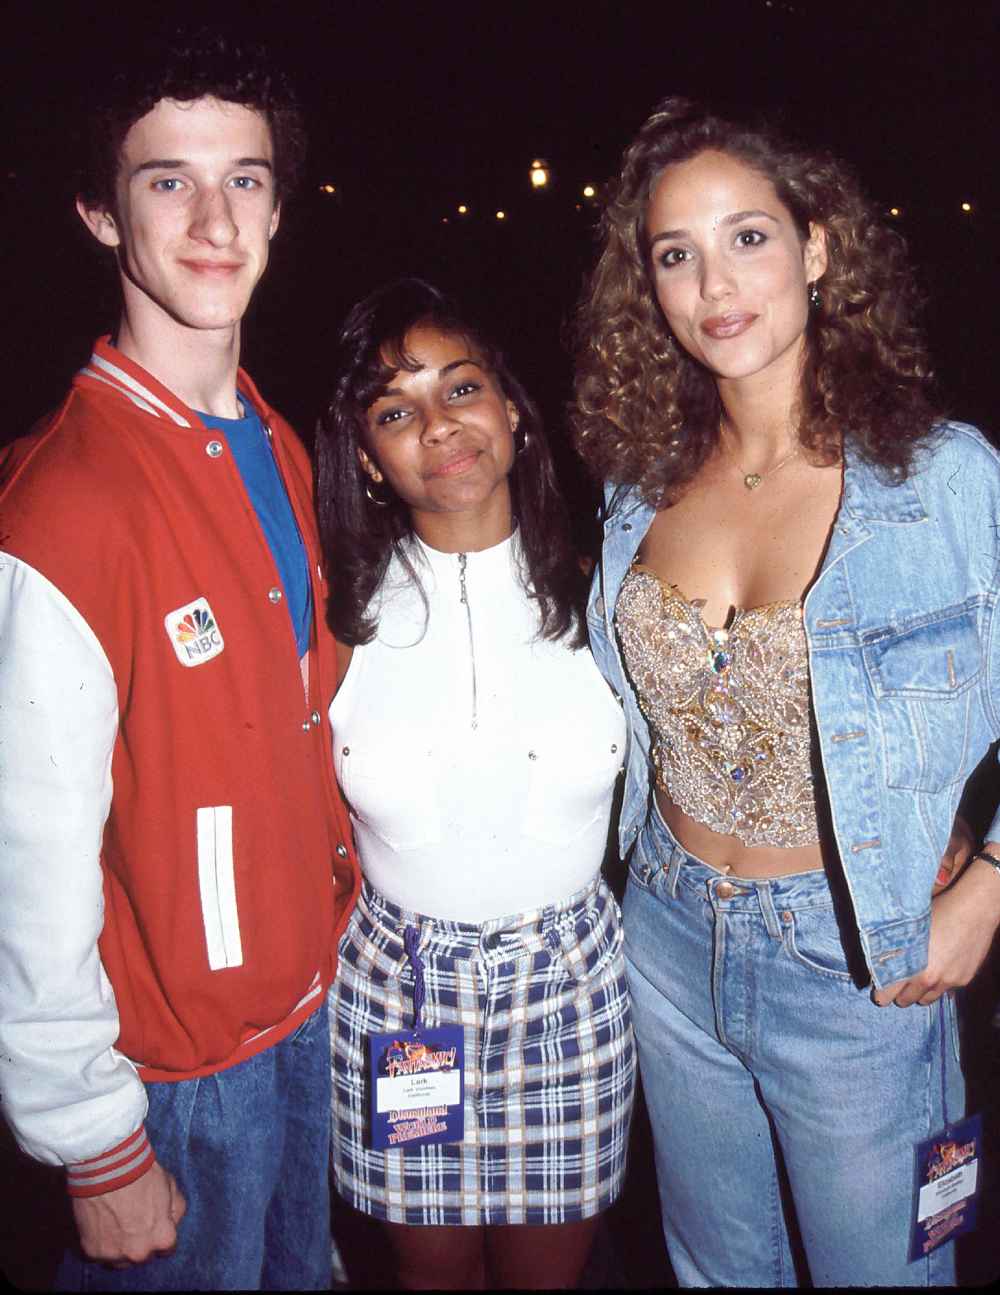 Dustin Diamond Lark Voorhies and Elizabeth Berkley in 1992 Elizabeth Berkley Has Not Spoken to Dustin Diamond Since Saved By the Bell Wrapped